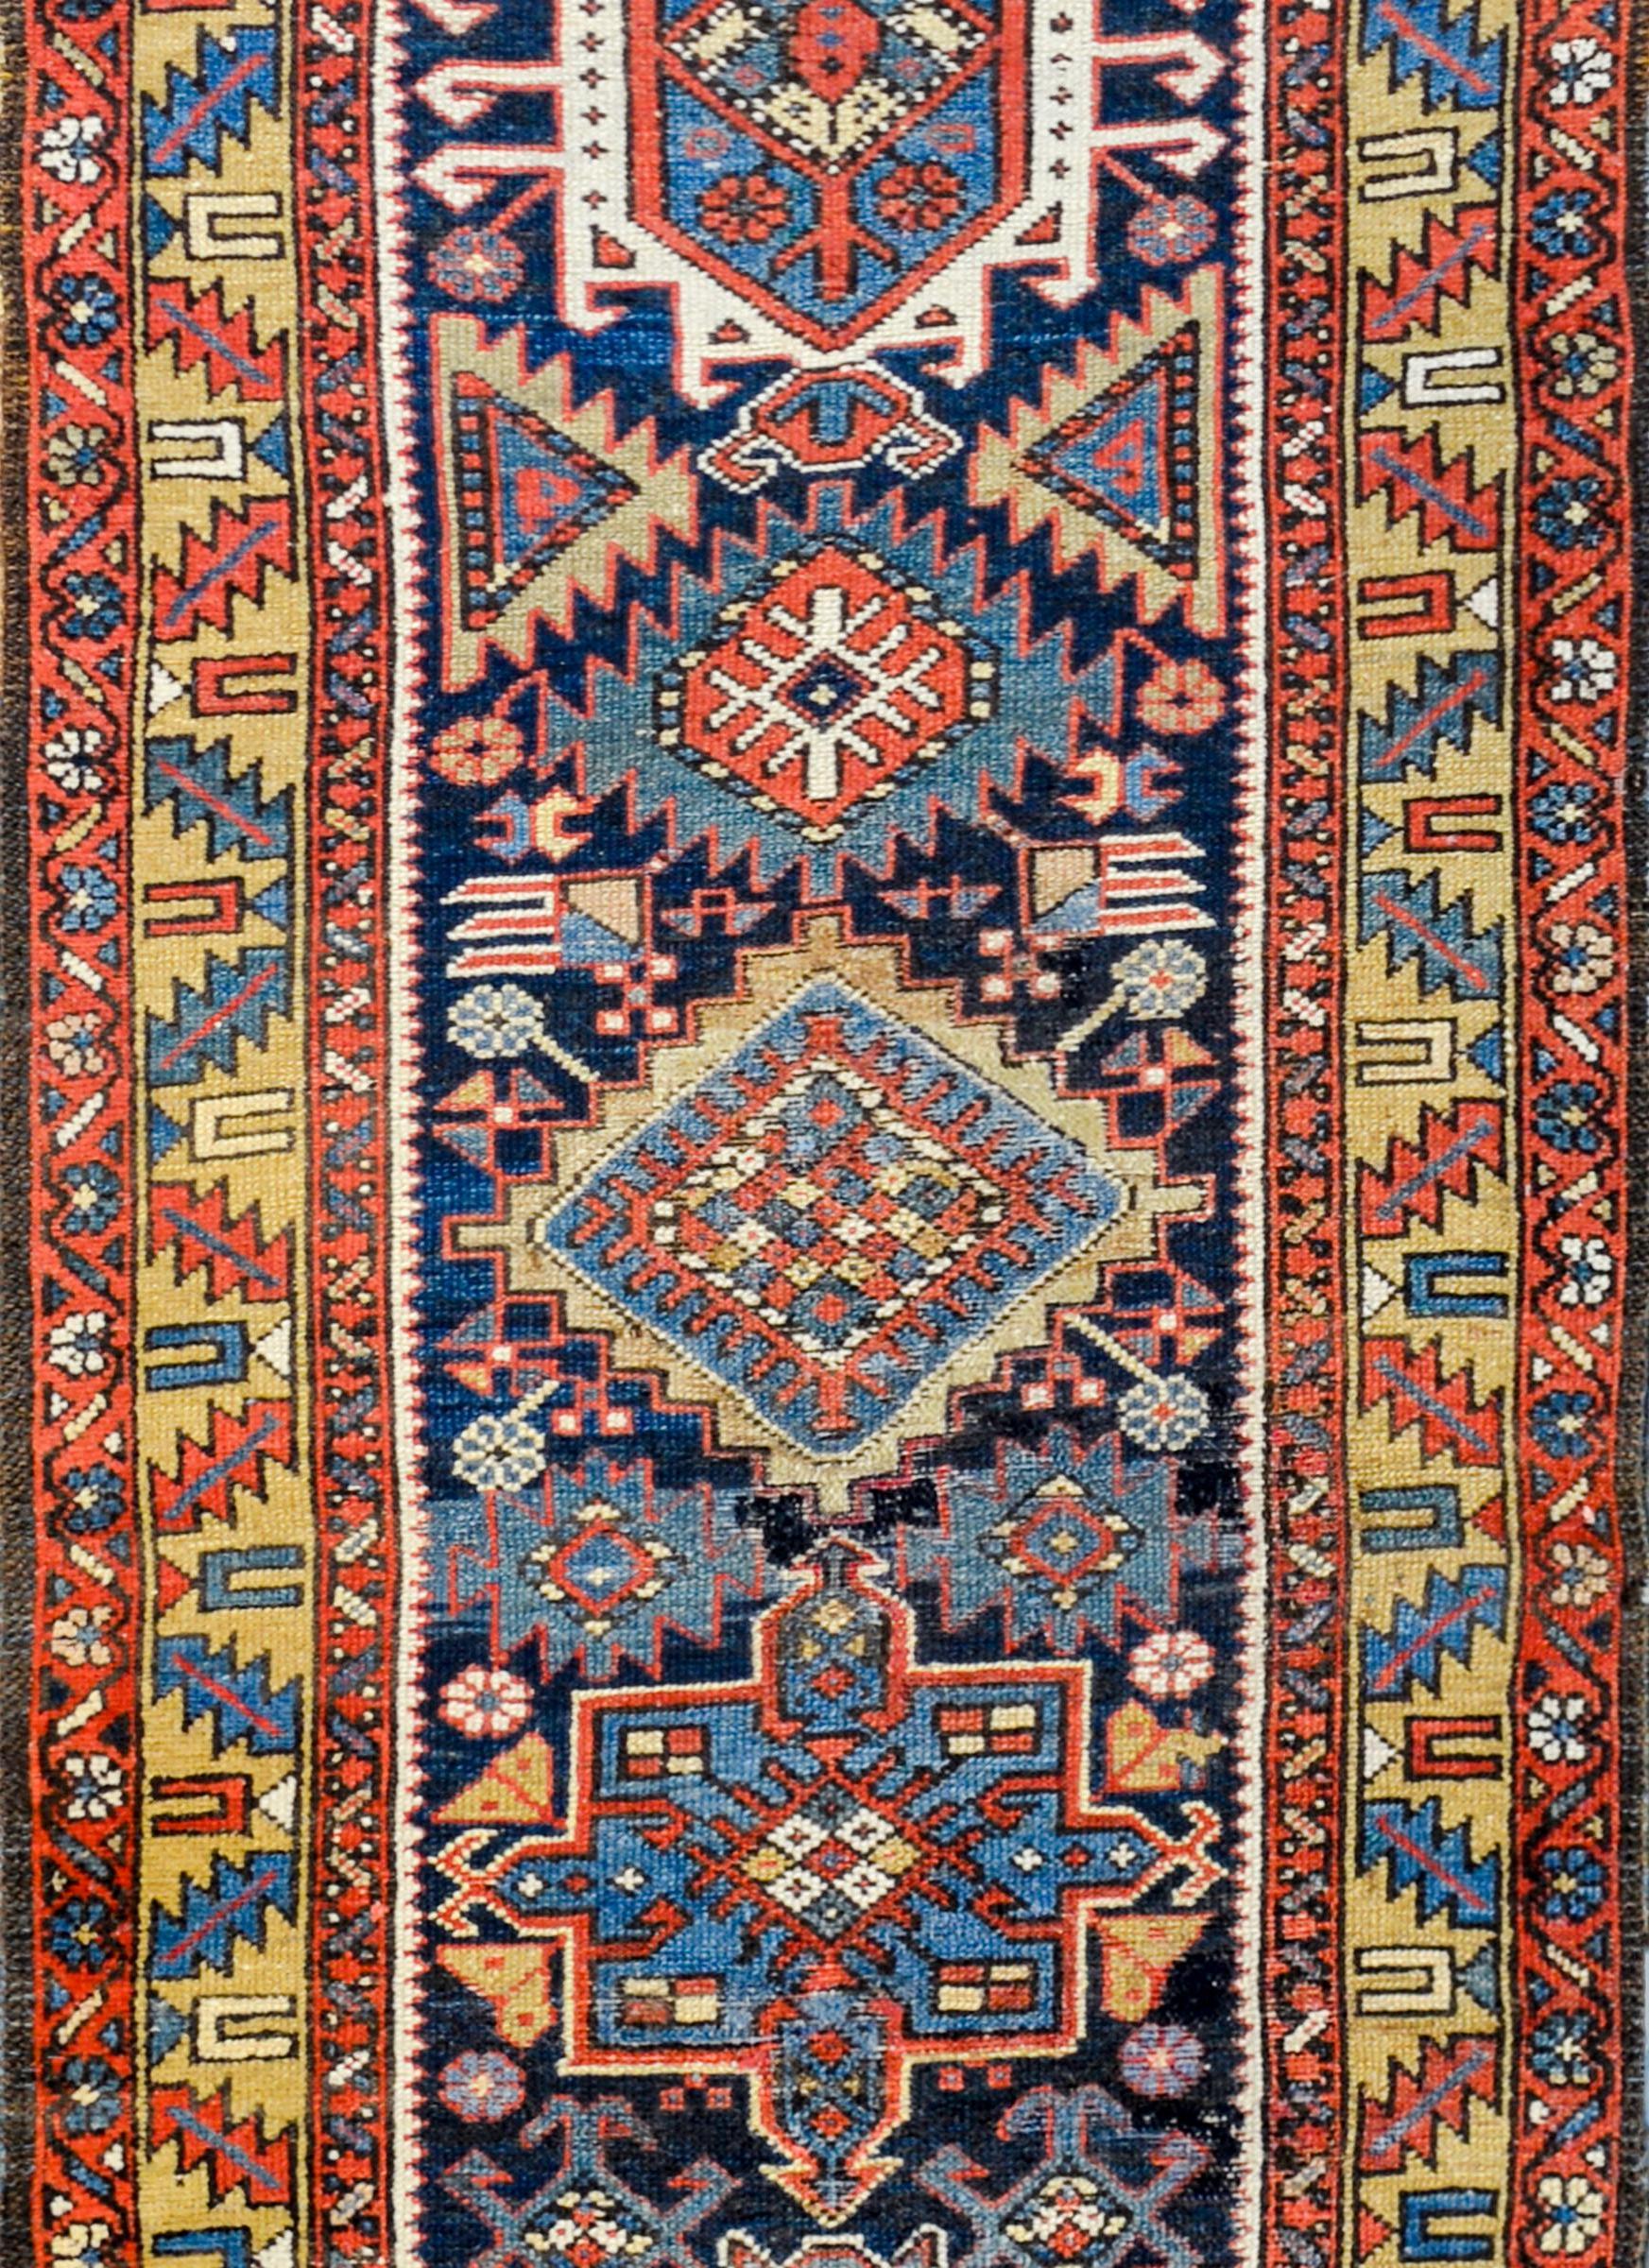 A fantastic early 20th century Persian Heriz runner with a bold tribal pattern consisting of multiple stylized floral medallions woven in gold, crimson, light indigo, and white, amidst a rich dark indigo field of more stylized flowers. The border is